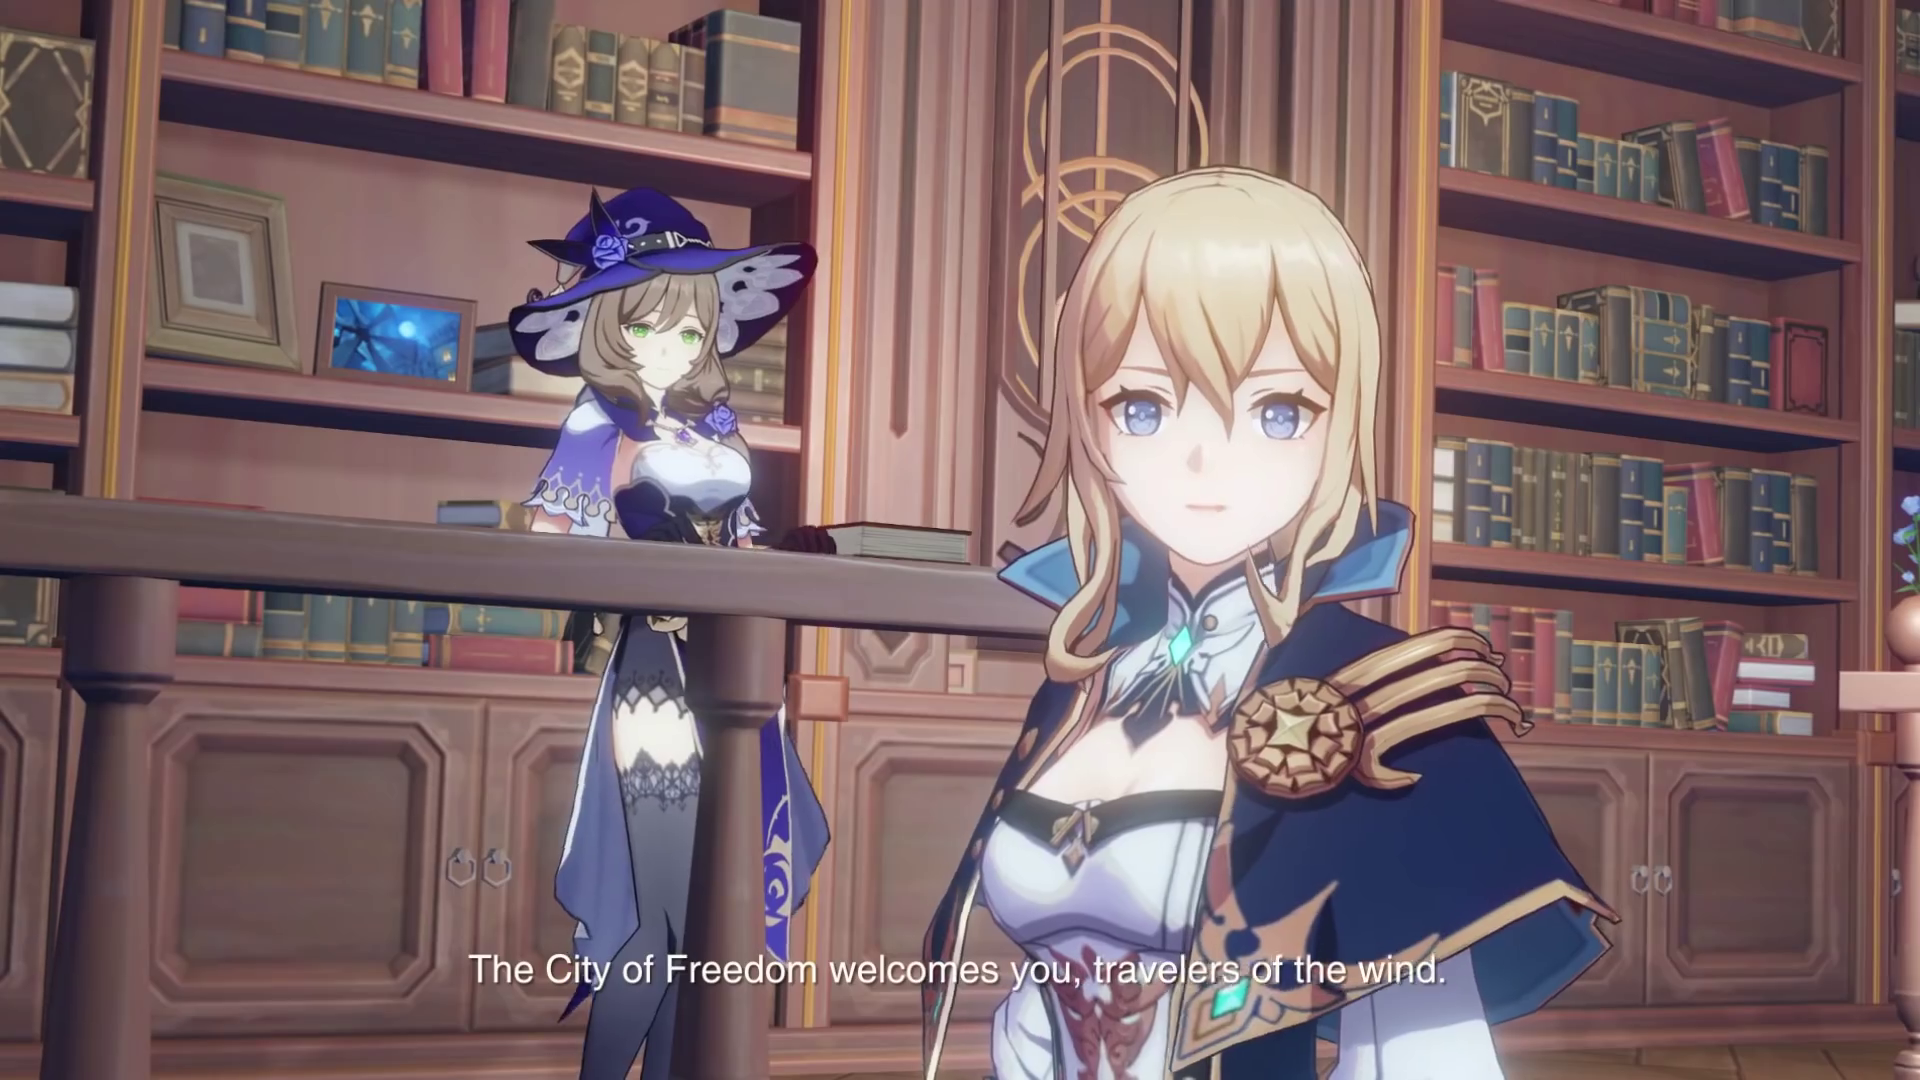 Anime MMORPG Blue Protocol showcases character creation